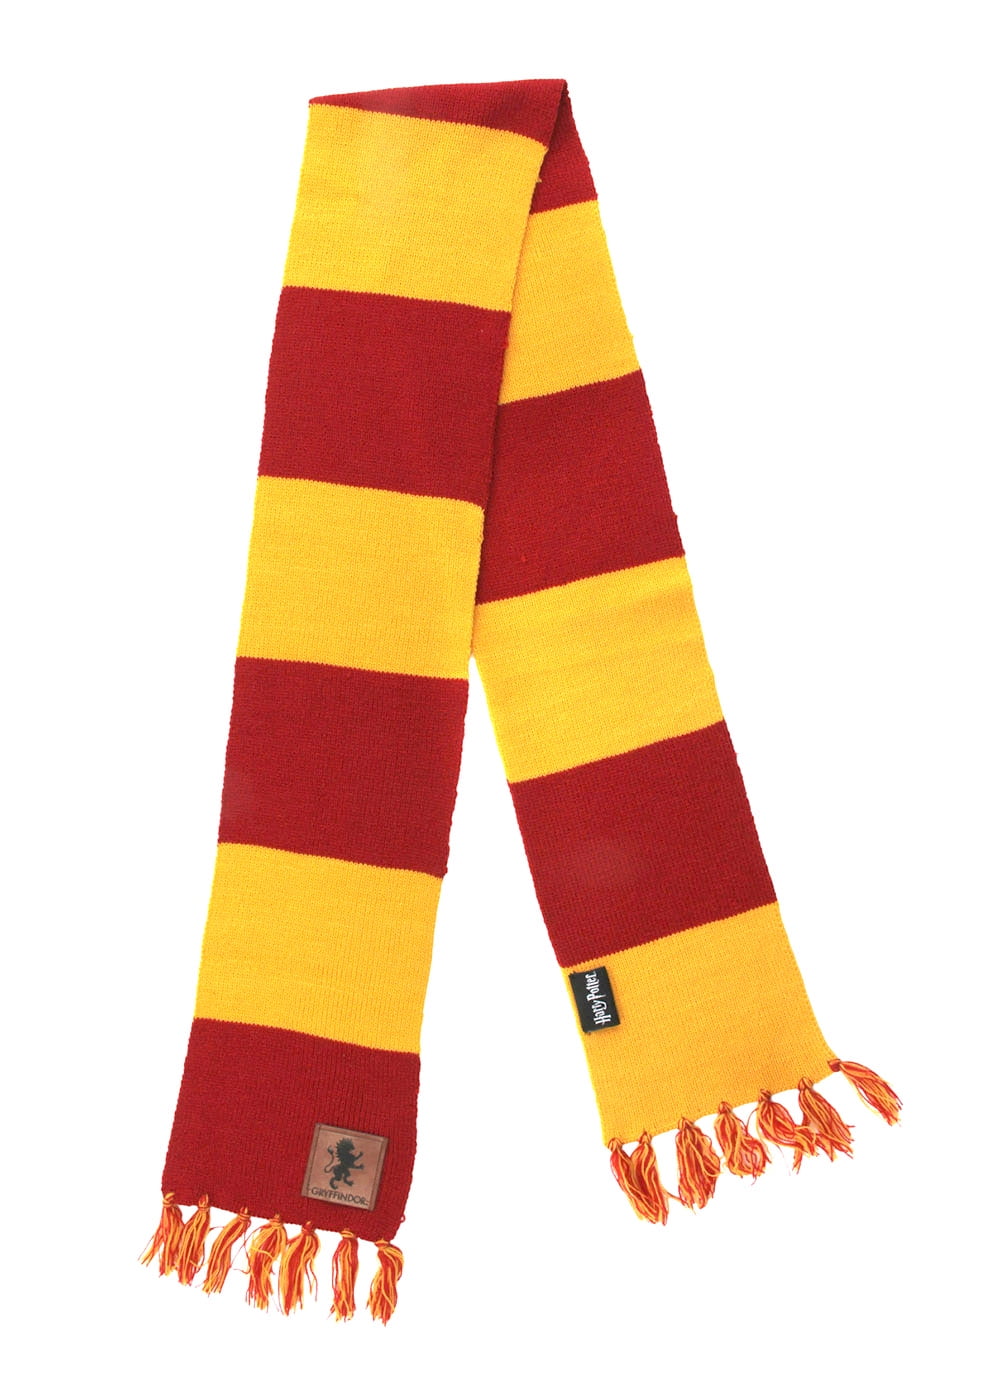 Harry Potter Scarf Ravenclaw Scarf Dress Up Cosplay Costume Accessories House 